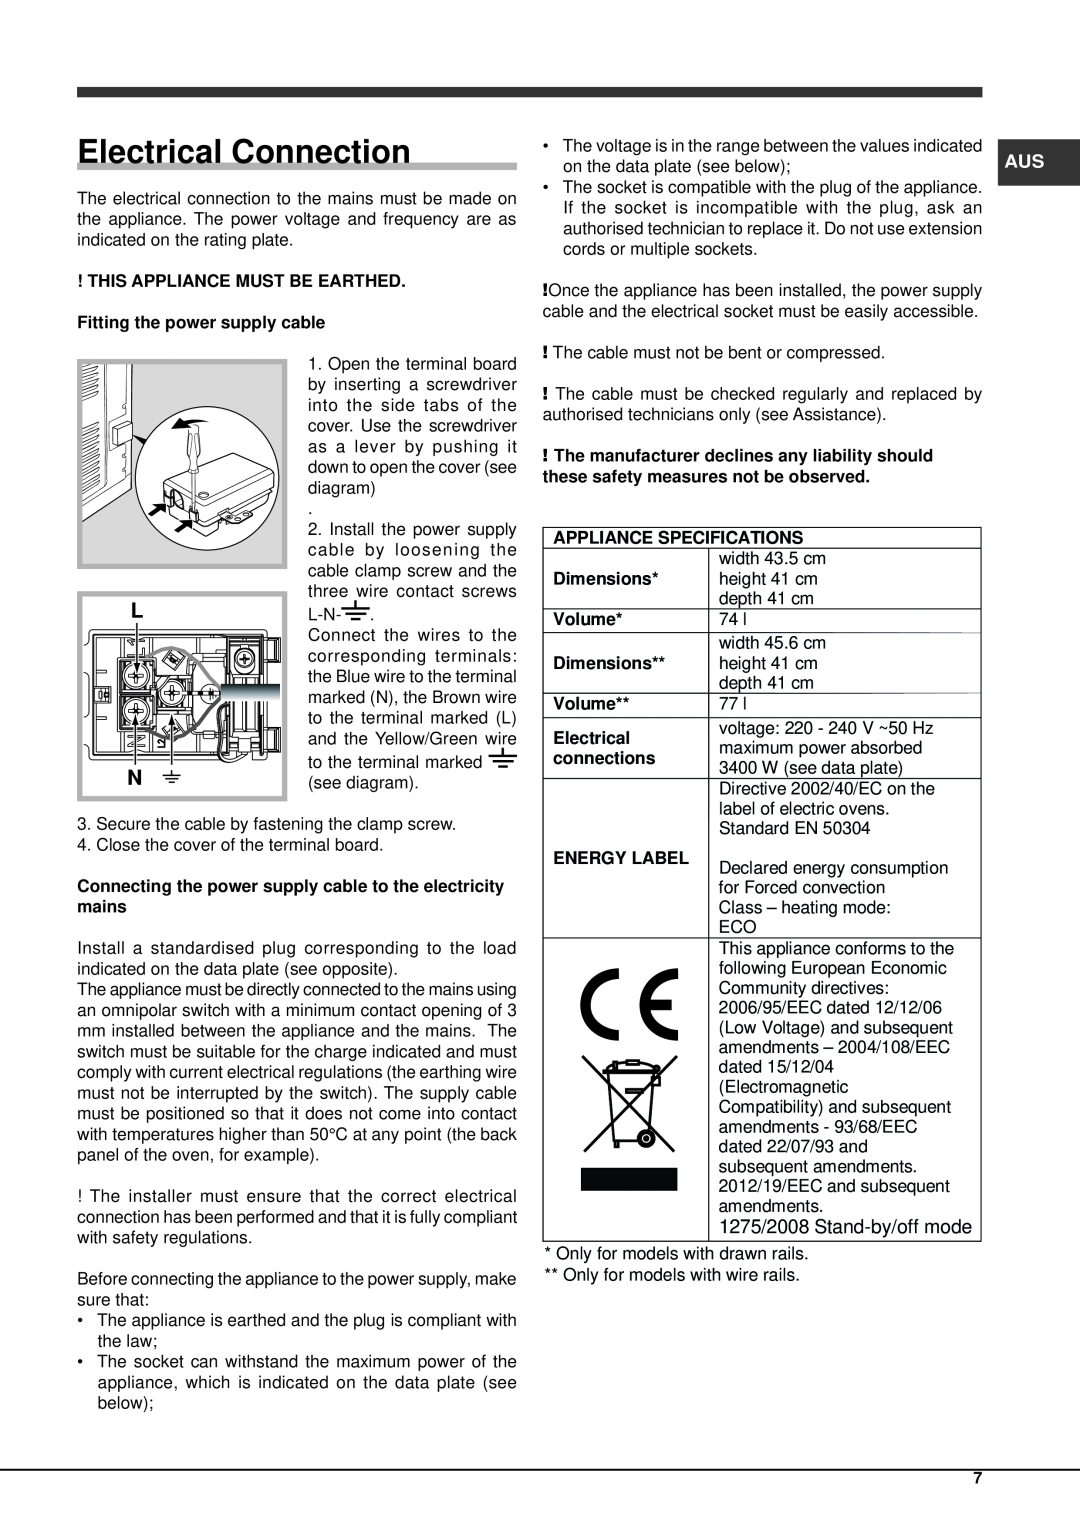 Ariston OK 892EL P AUS S Electrical Connection, Appliance Specifications, Dimensions, Volume, connections, Energy Label 